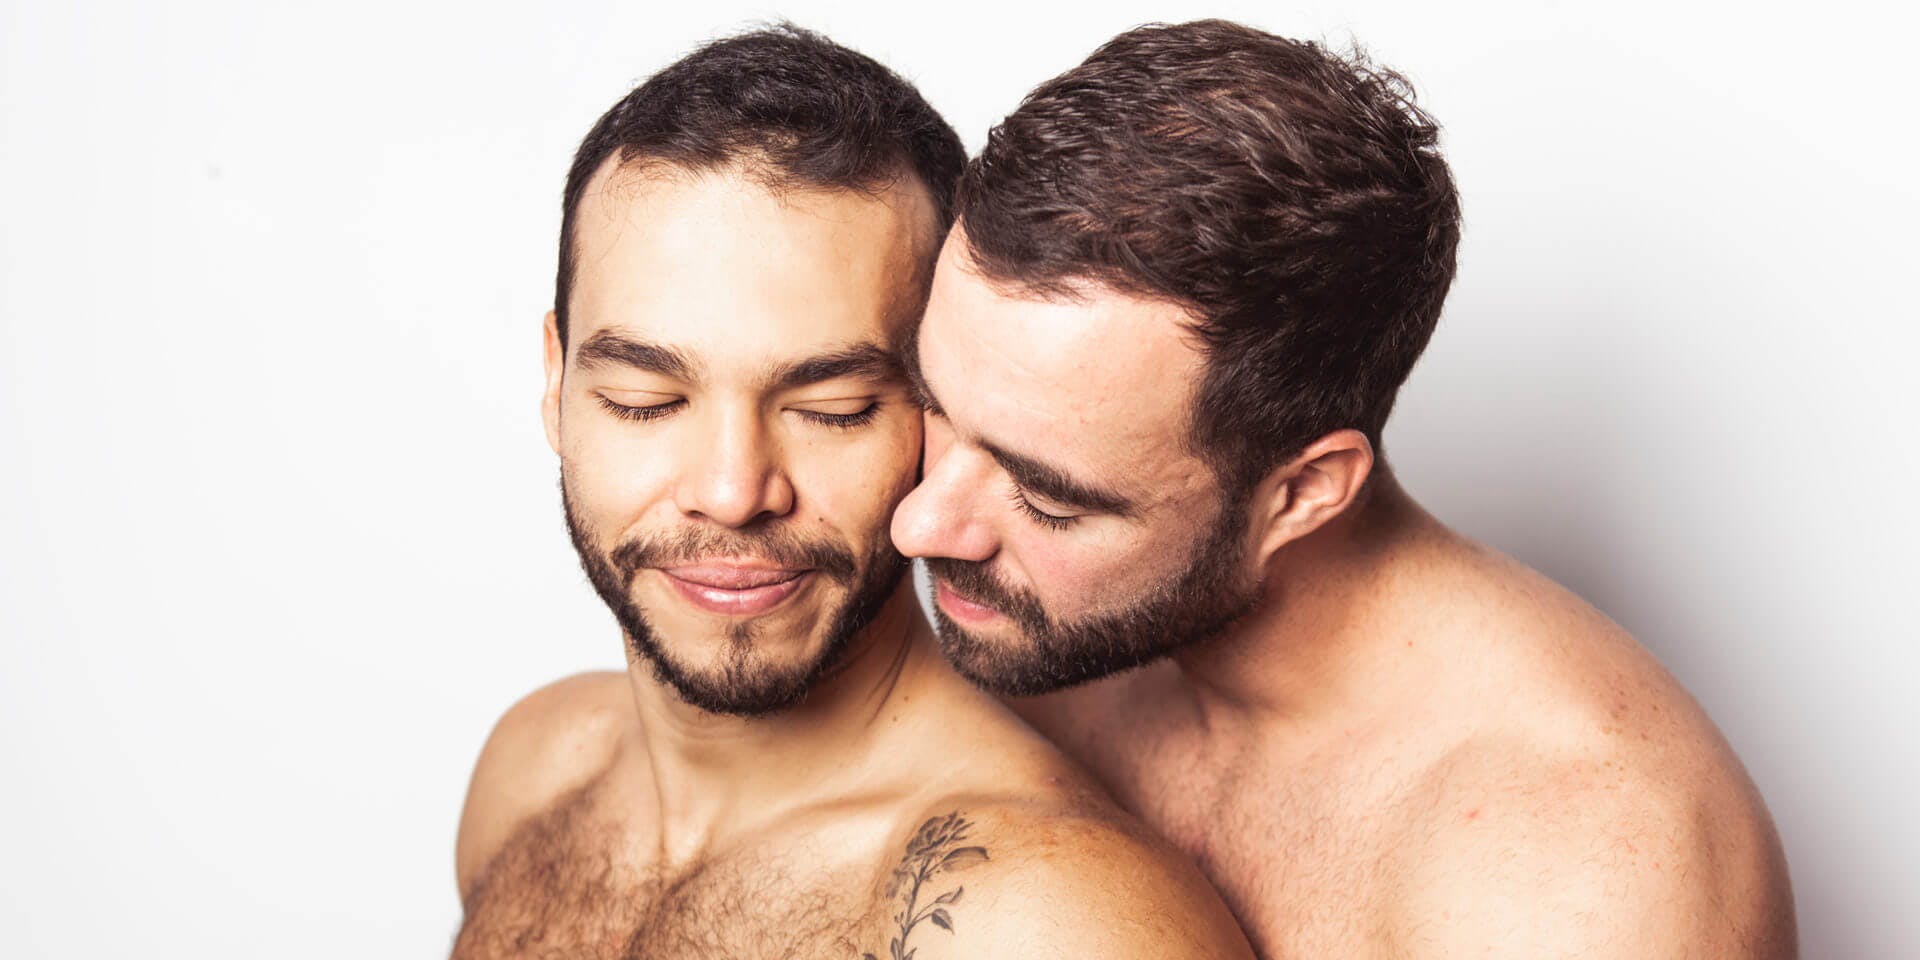 The 11 best gay porn sites of 2019